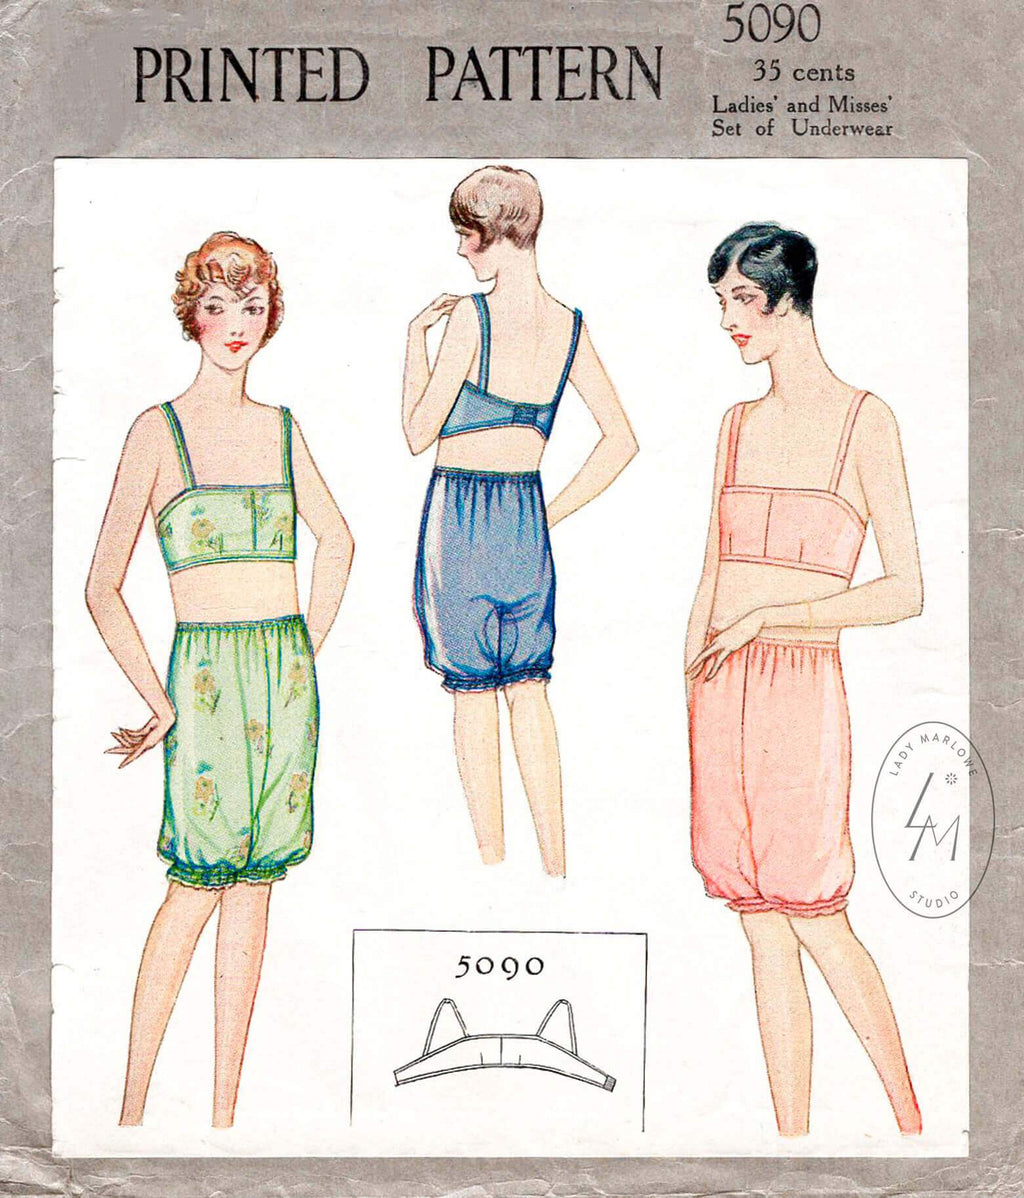 McCall 5090 1920s 1927 vintage lingerie sewing pattern bra bloomers flapper undergarments reproduction